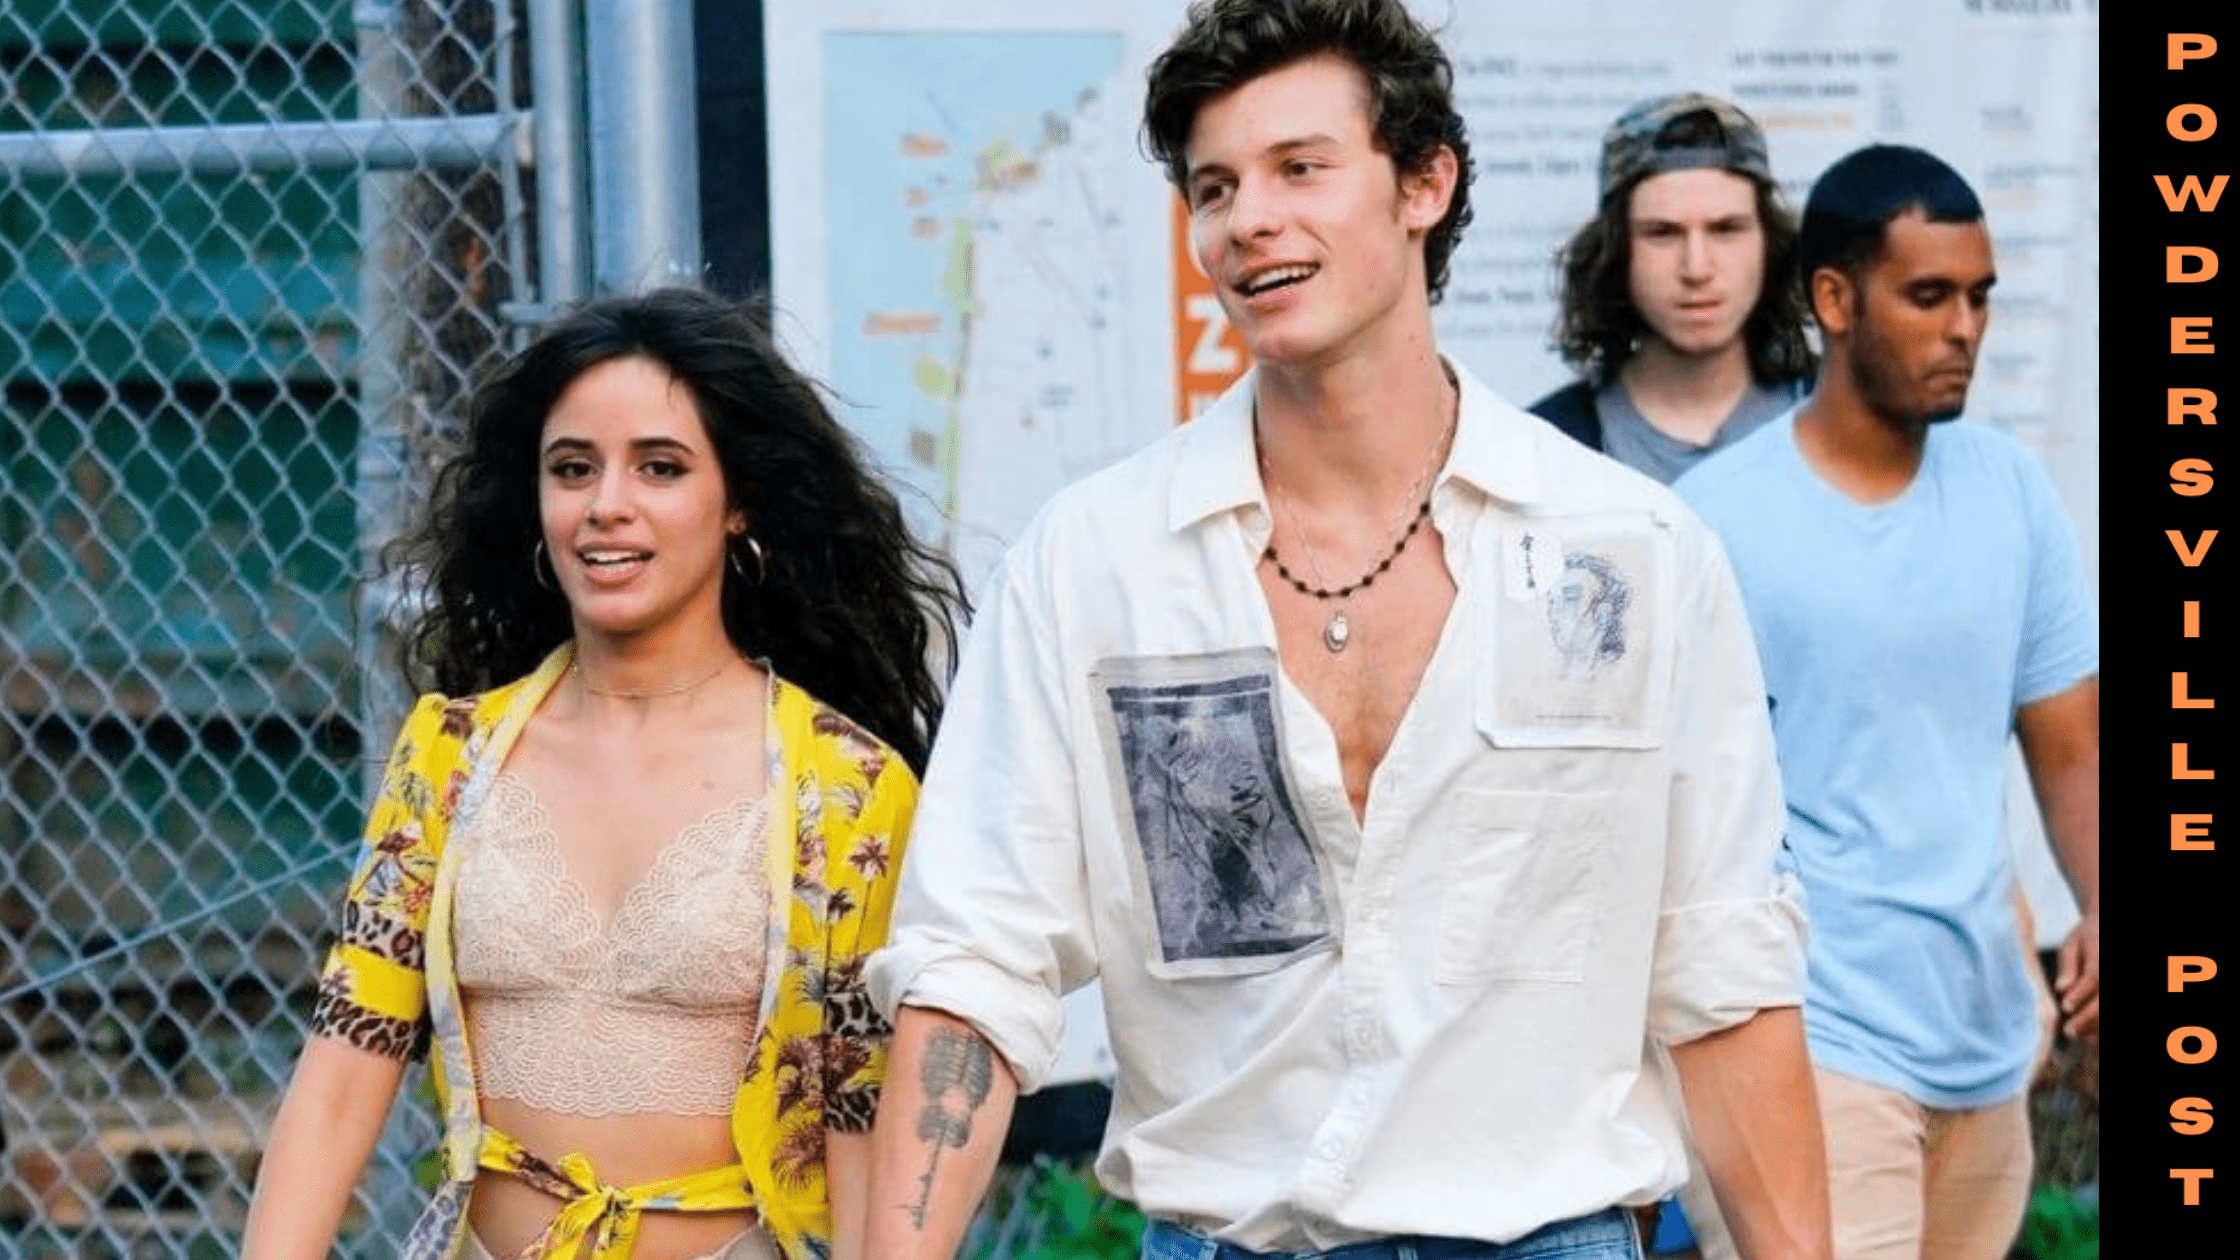 Camila Cabello's Breakup Prompted Shawn Mendes To Reflect On Life After She Left Him,